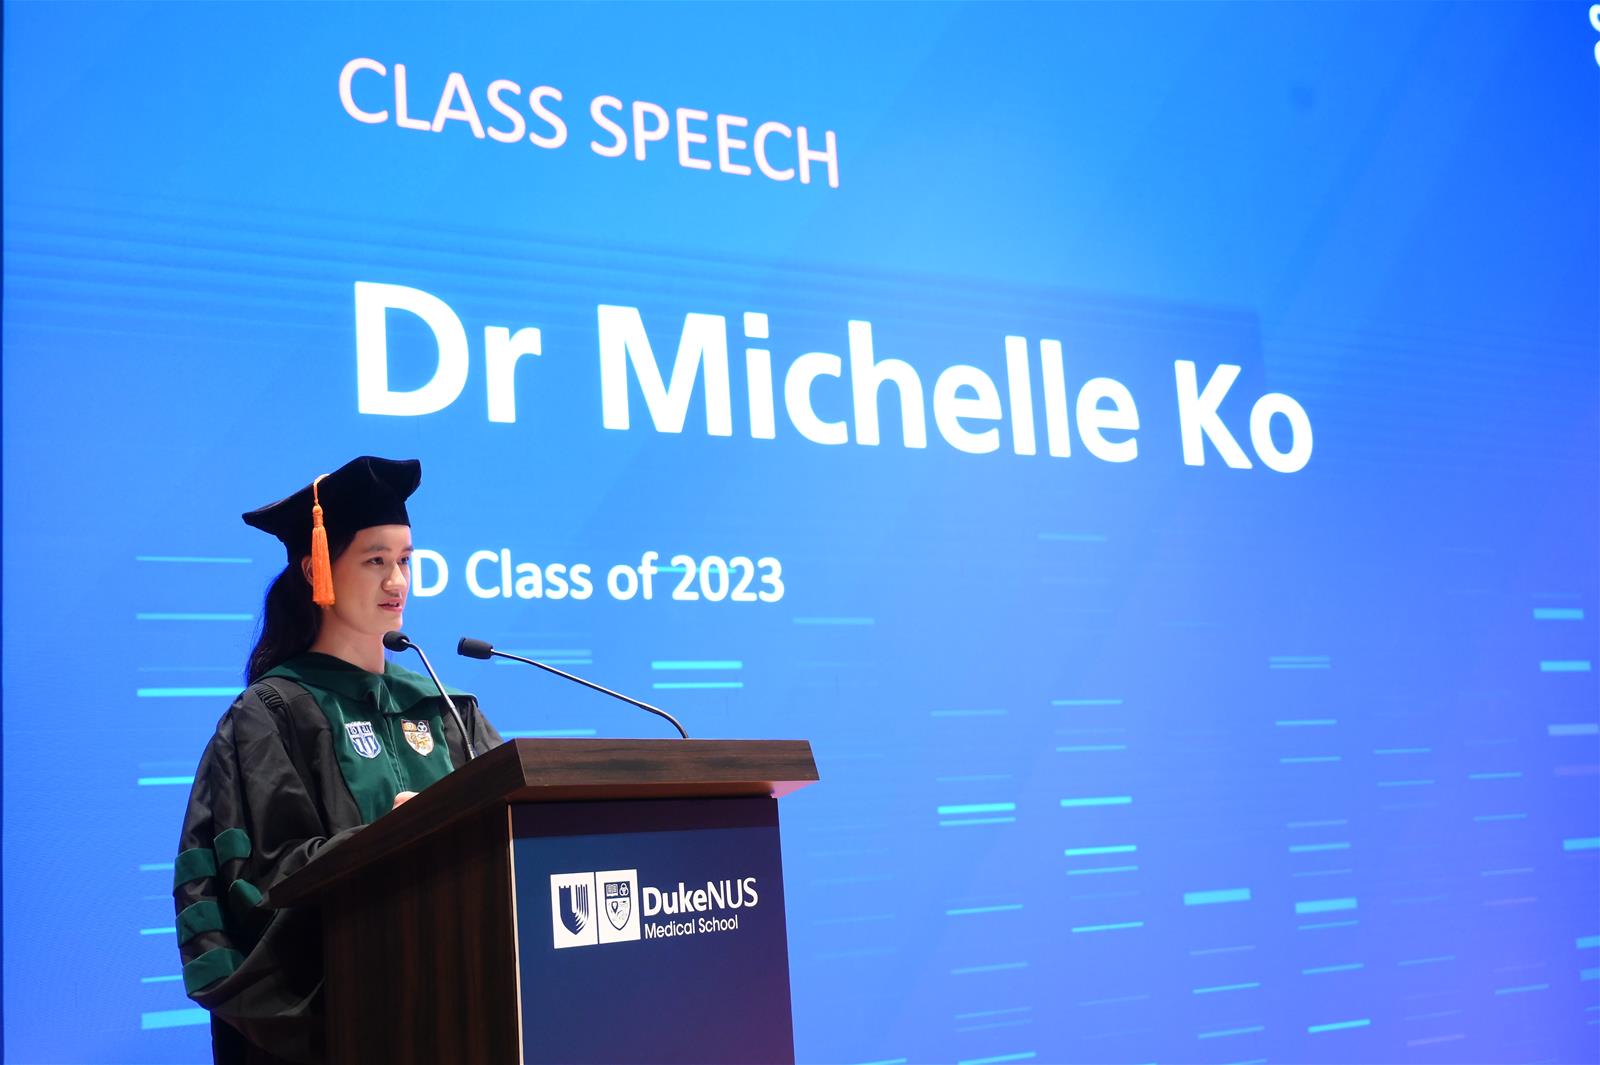 Dr Michelle Ko, MD Class of 2023